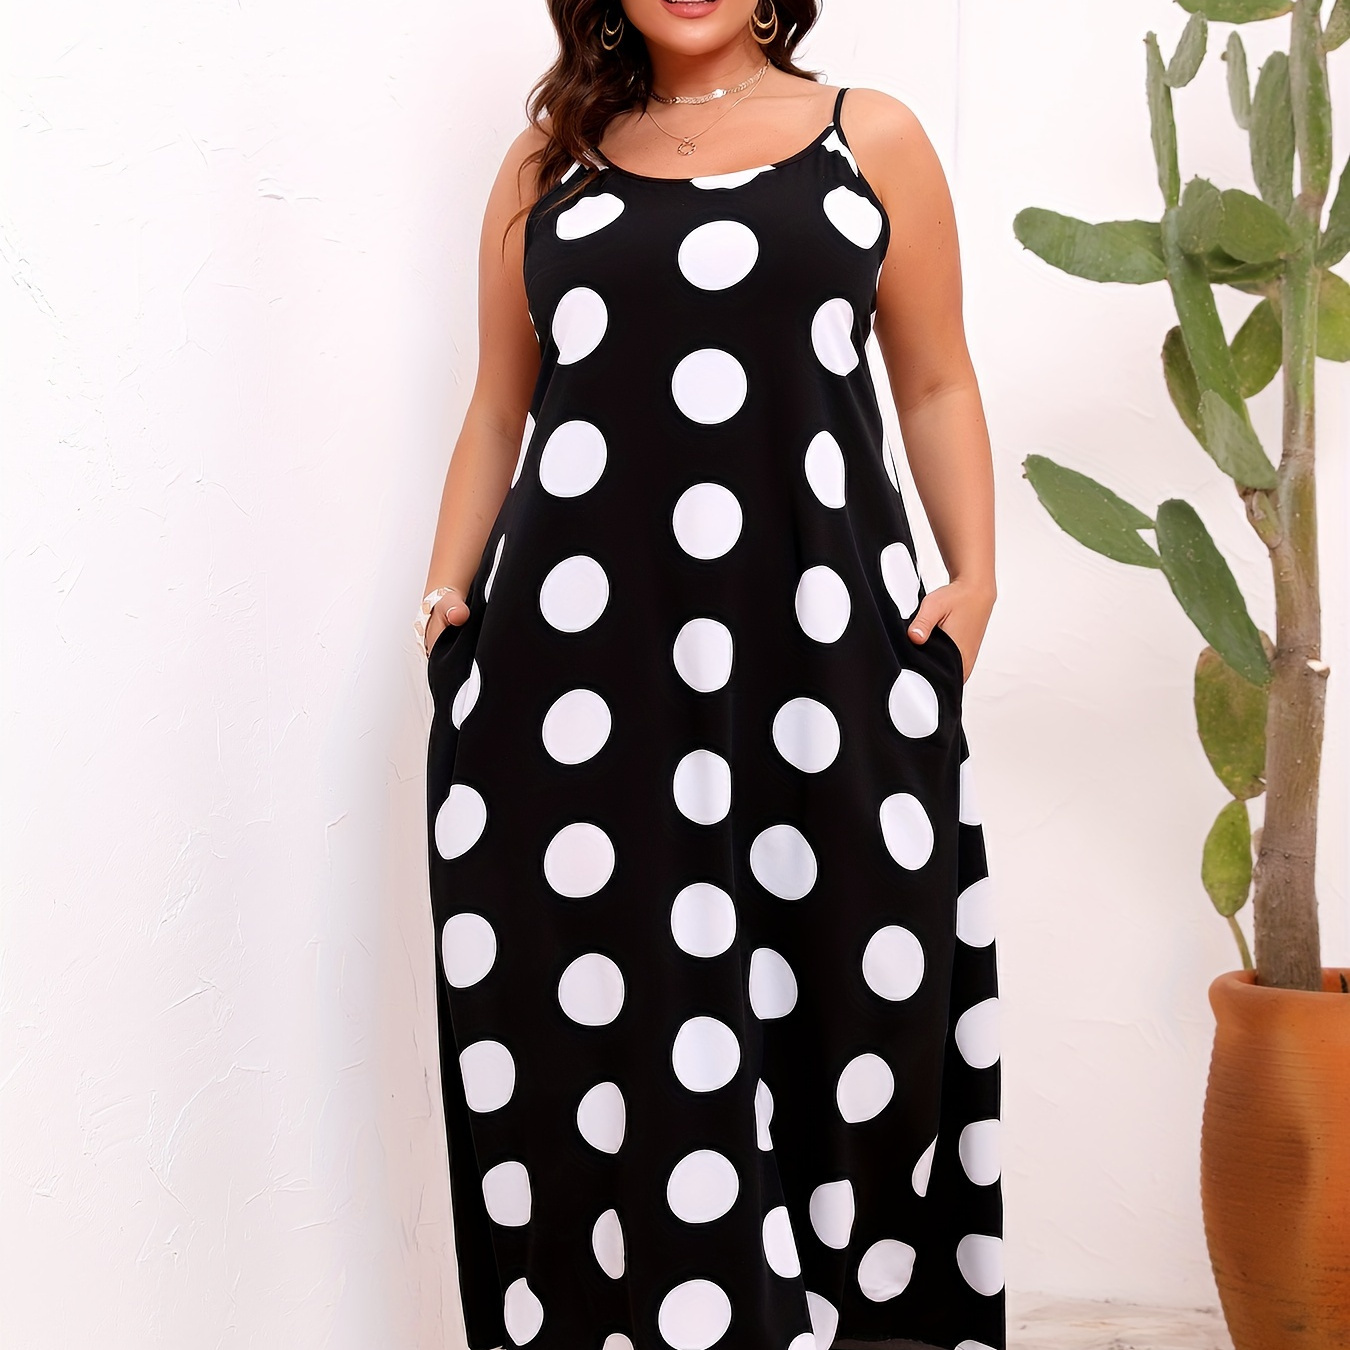 

Plus Size Polka Dot Print Cami Dress, Casual Pocket Ankle Length Spaghetti Strap Dress For Spring & Summer, Women's Plus Size Clothing